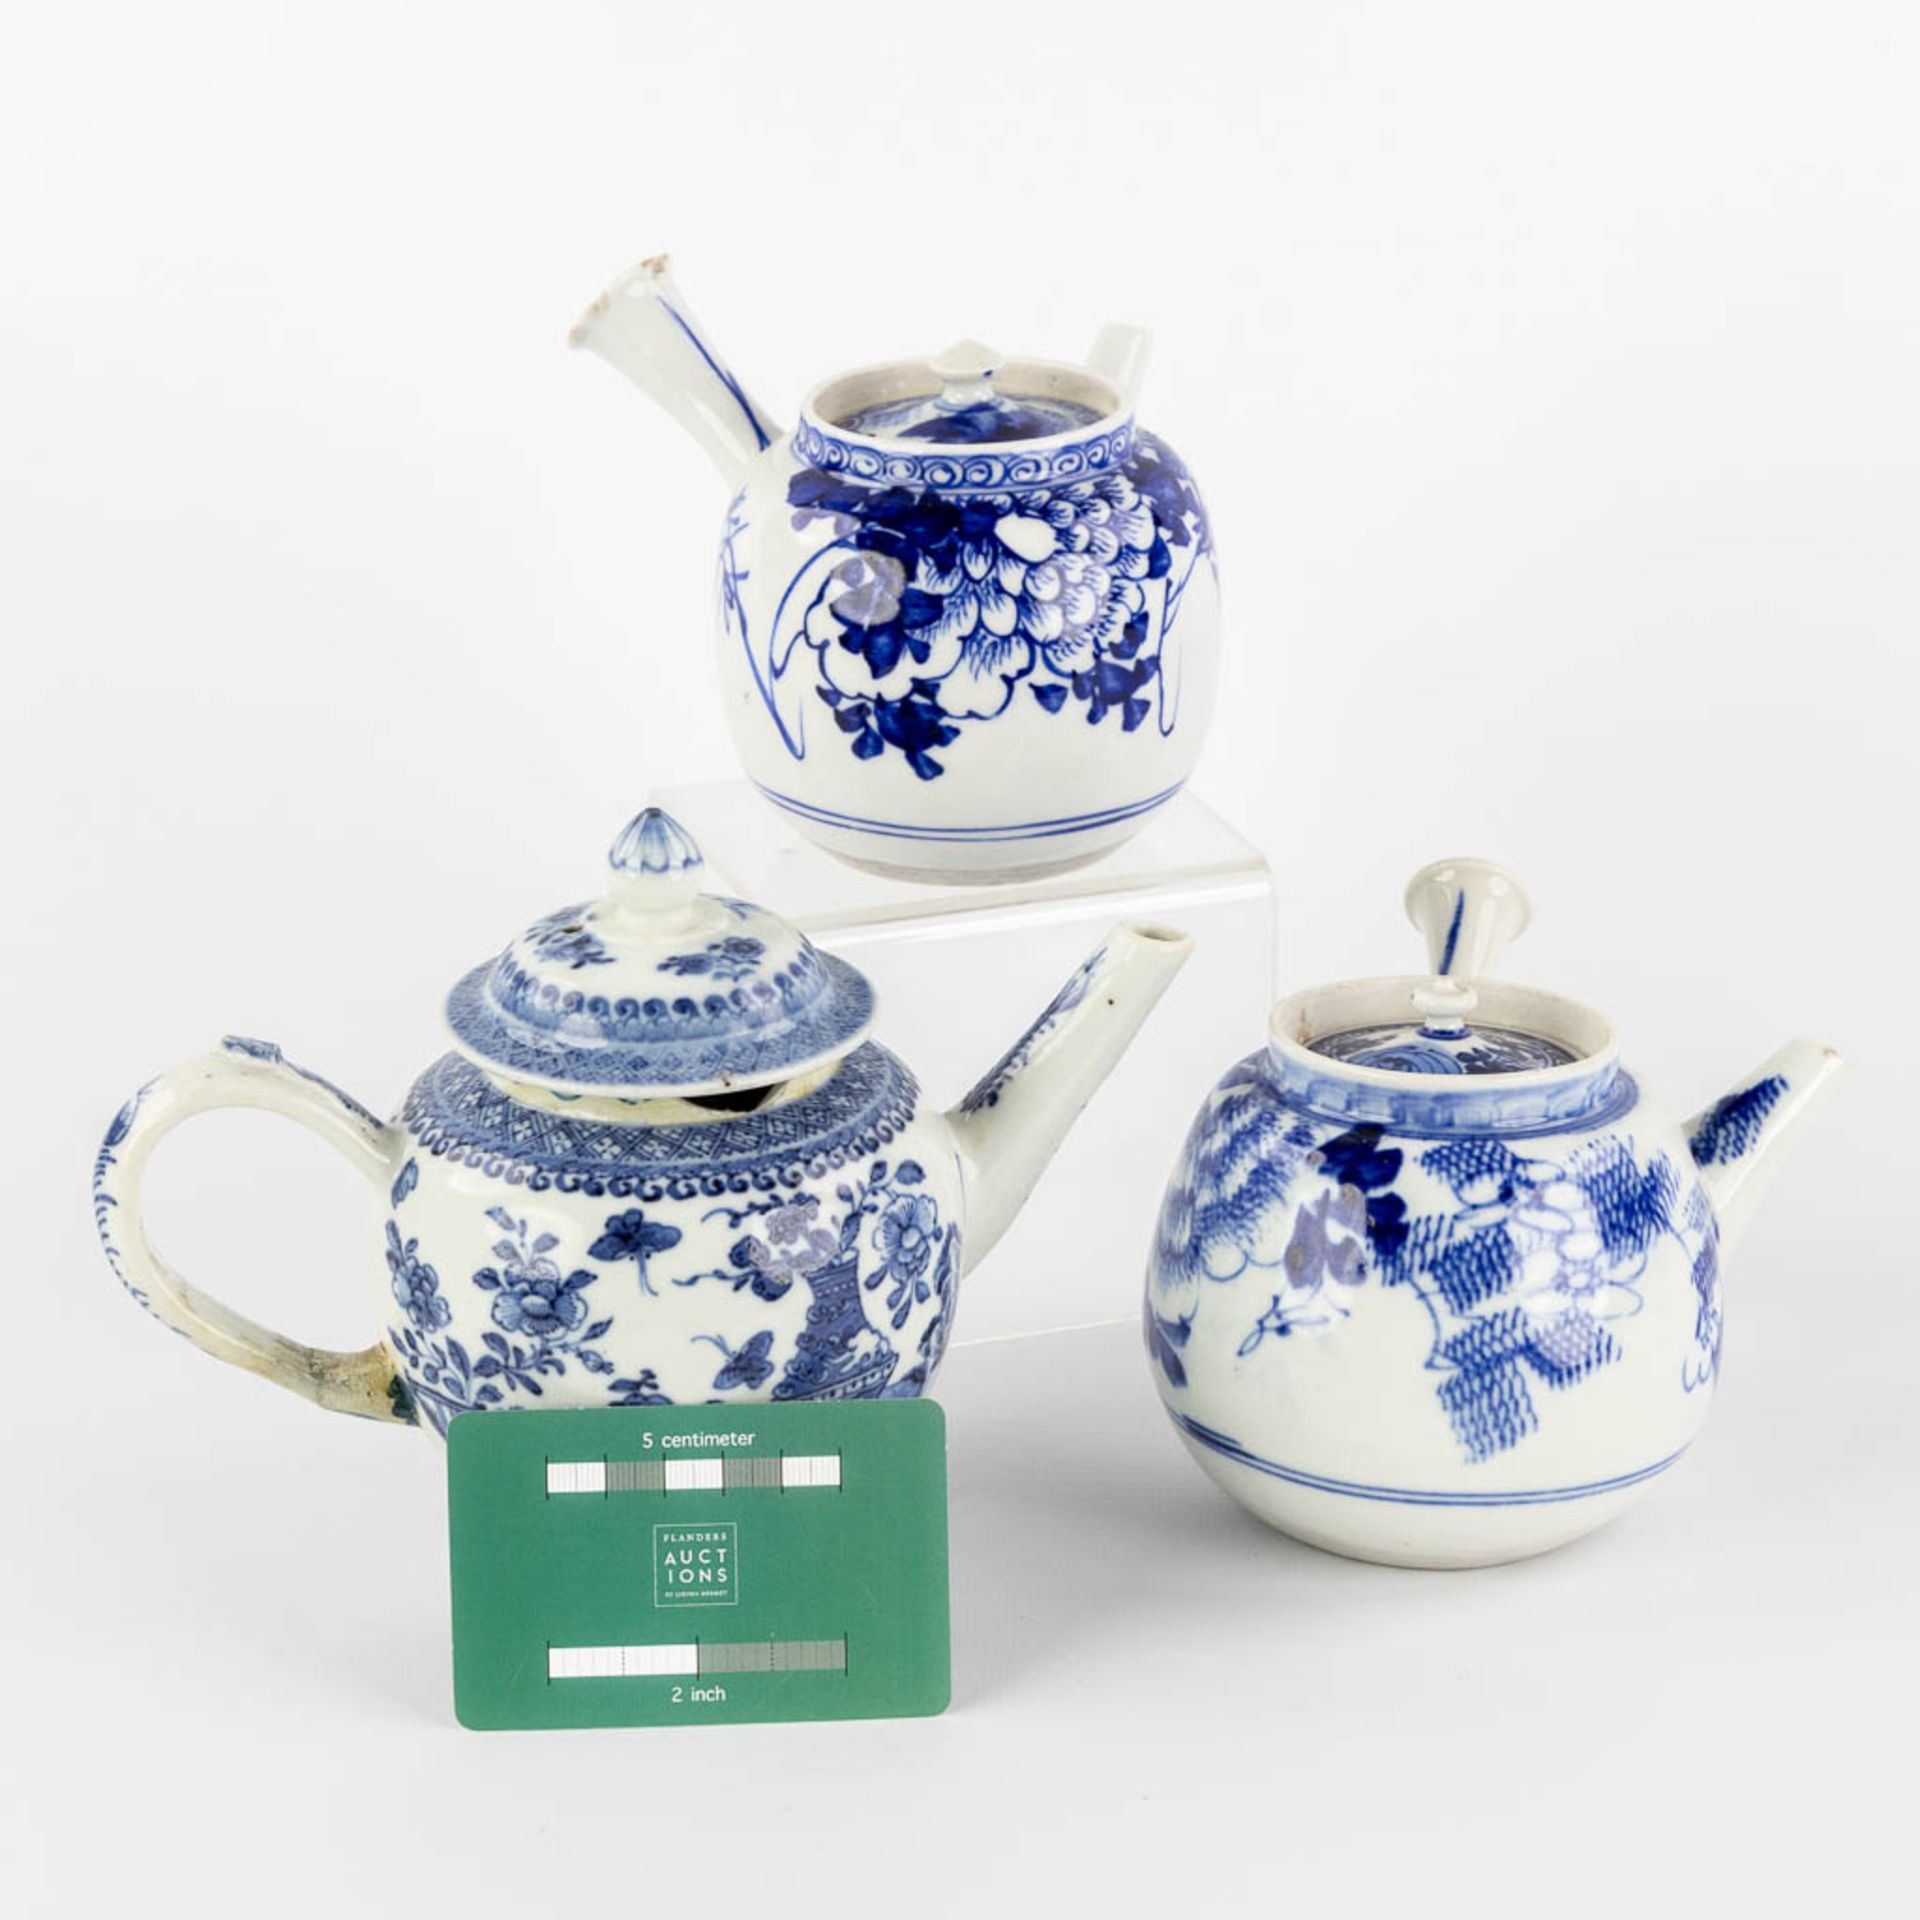 Three Chinese and Japanese teapots, blue-white decor. (W:20 x H:14 cm) - Image 2 of 17